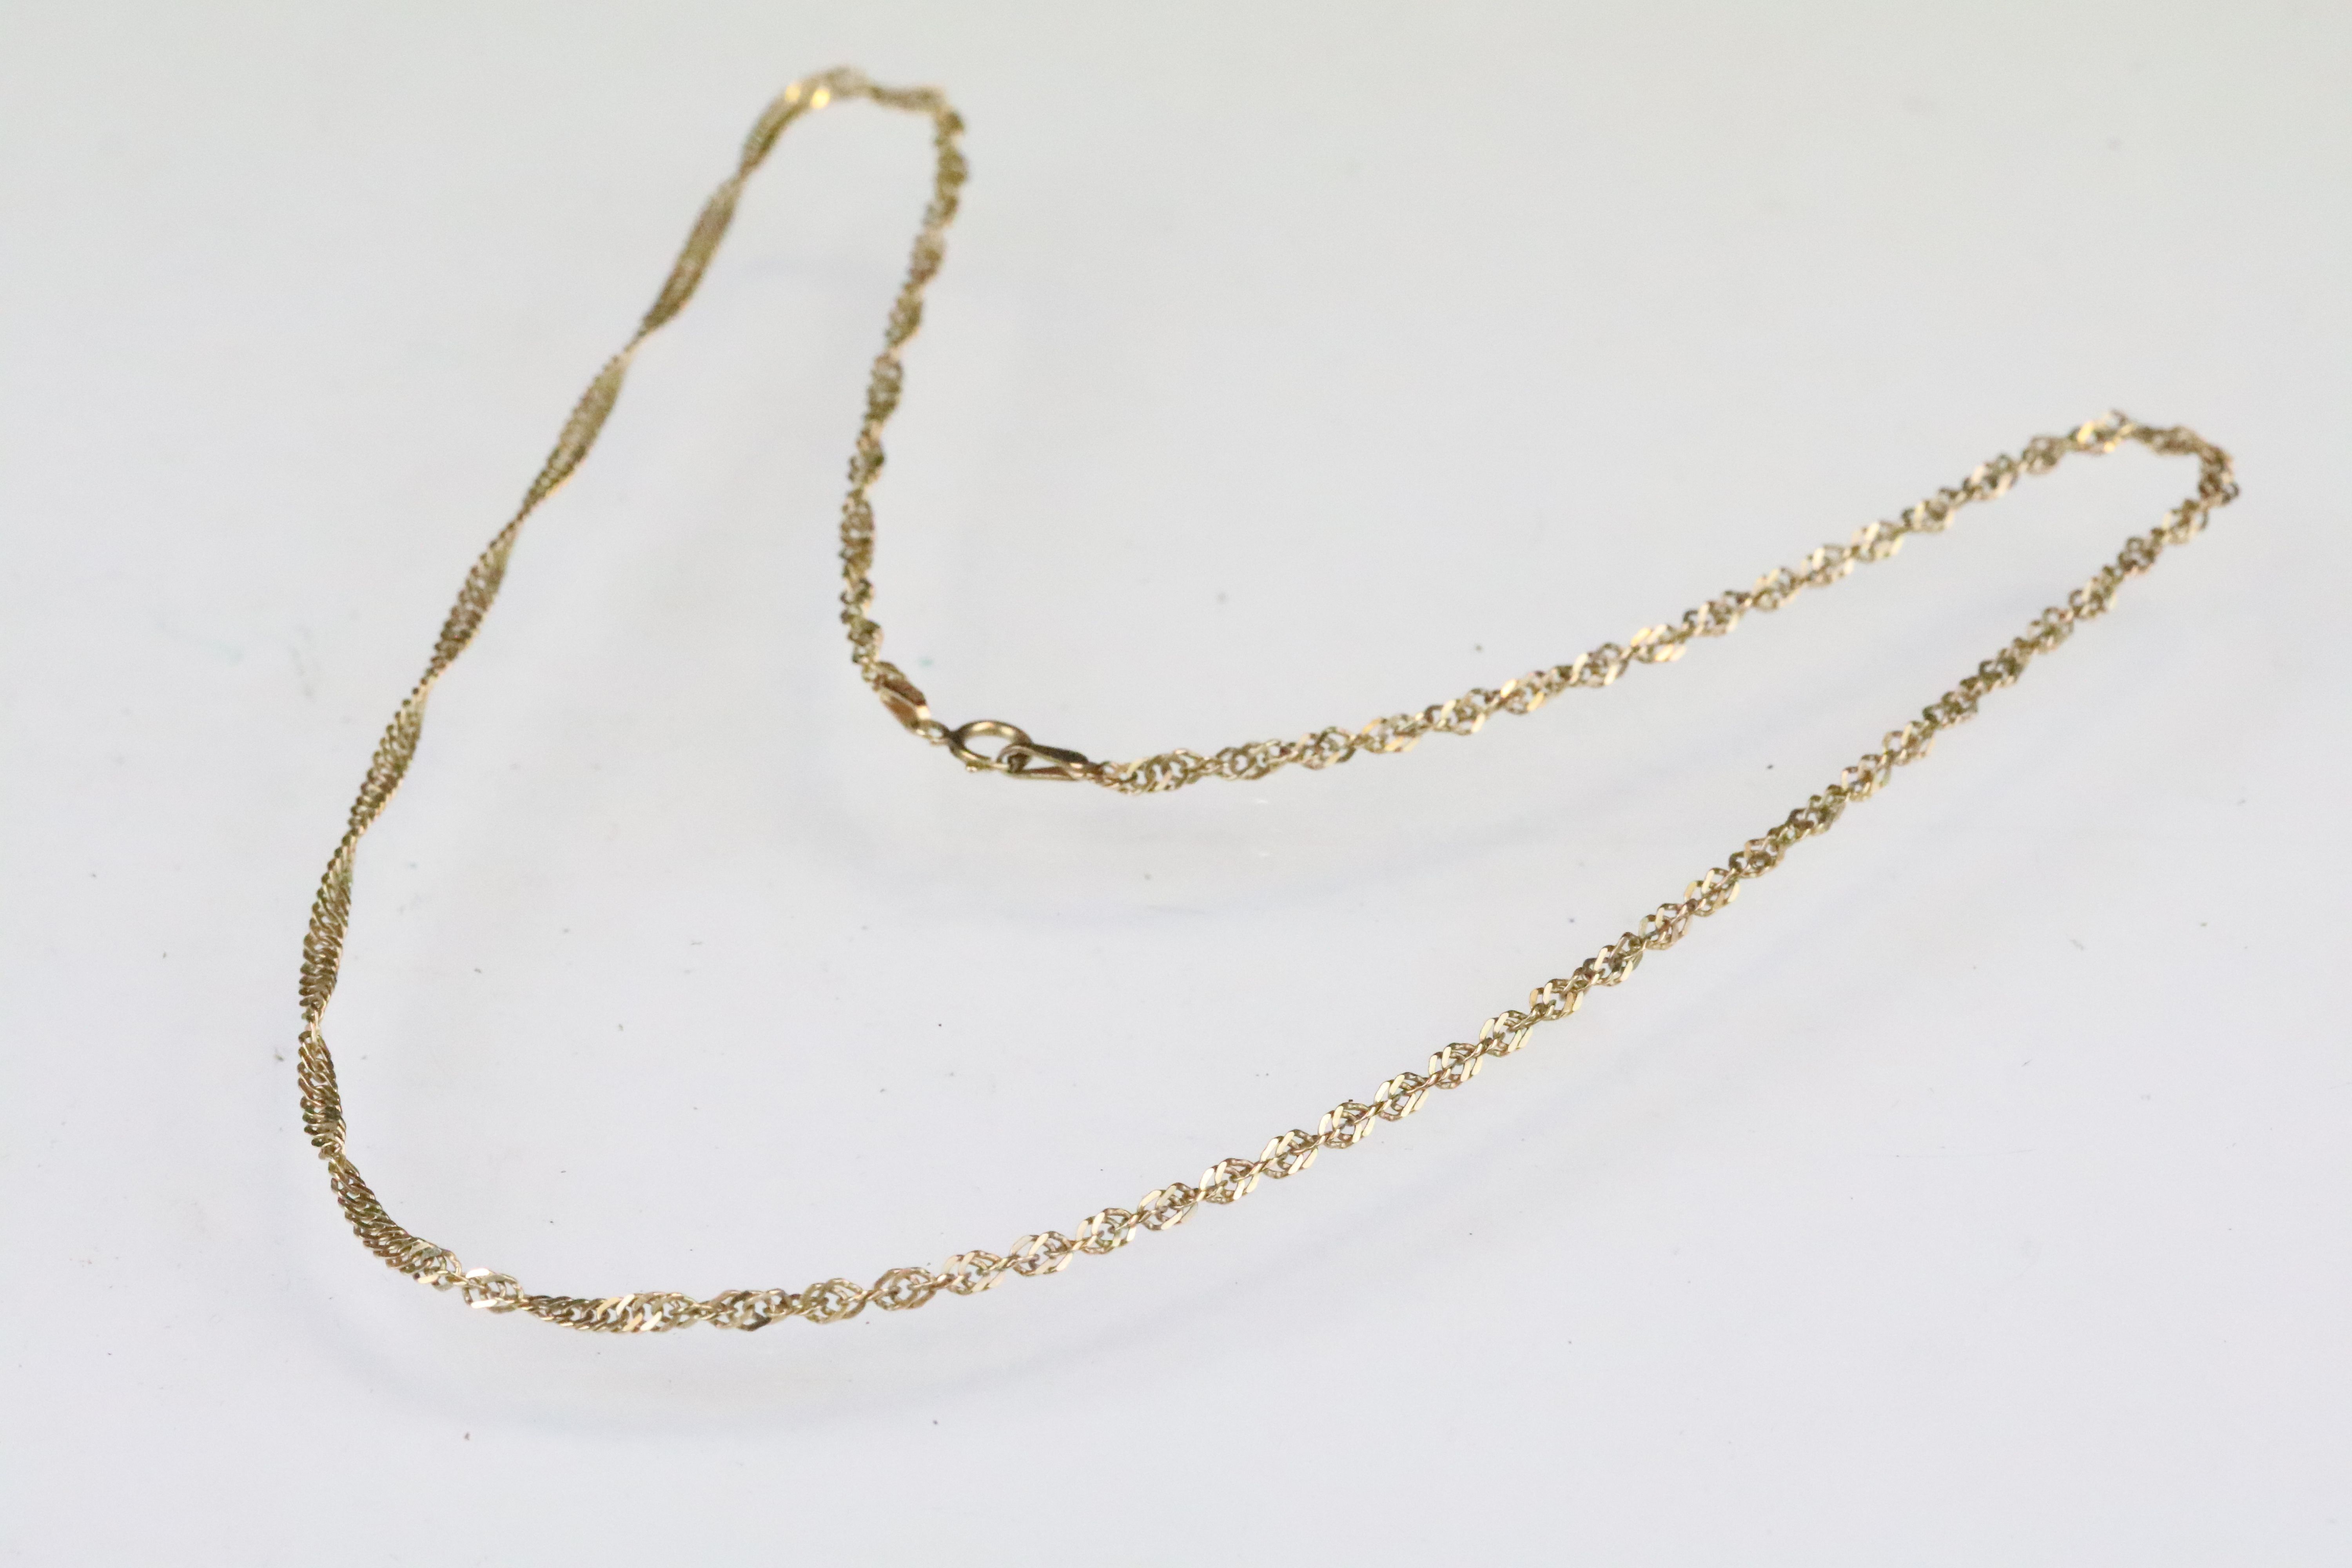 9ct gold fine rope twist necklace chain with spring ring clasp (hallmarked to clasp) together with a - Image 3 of 9